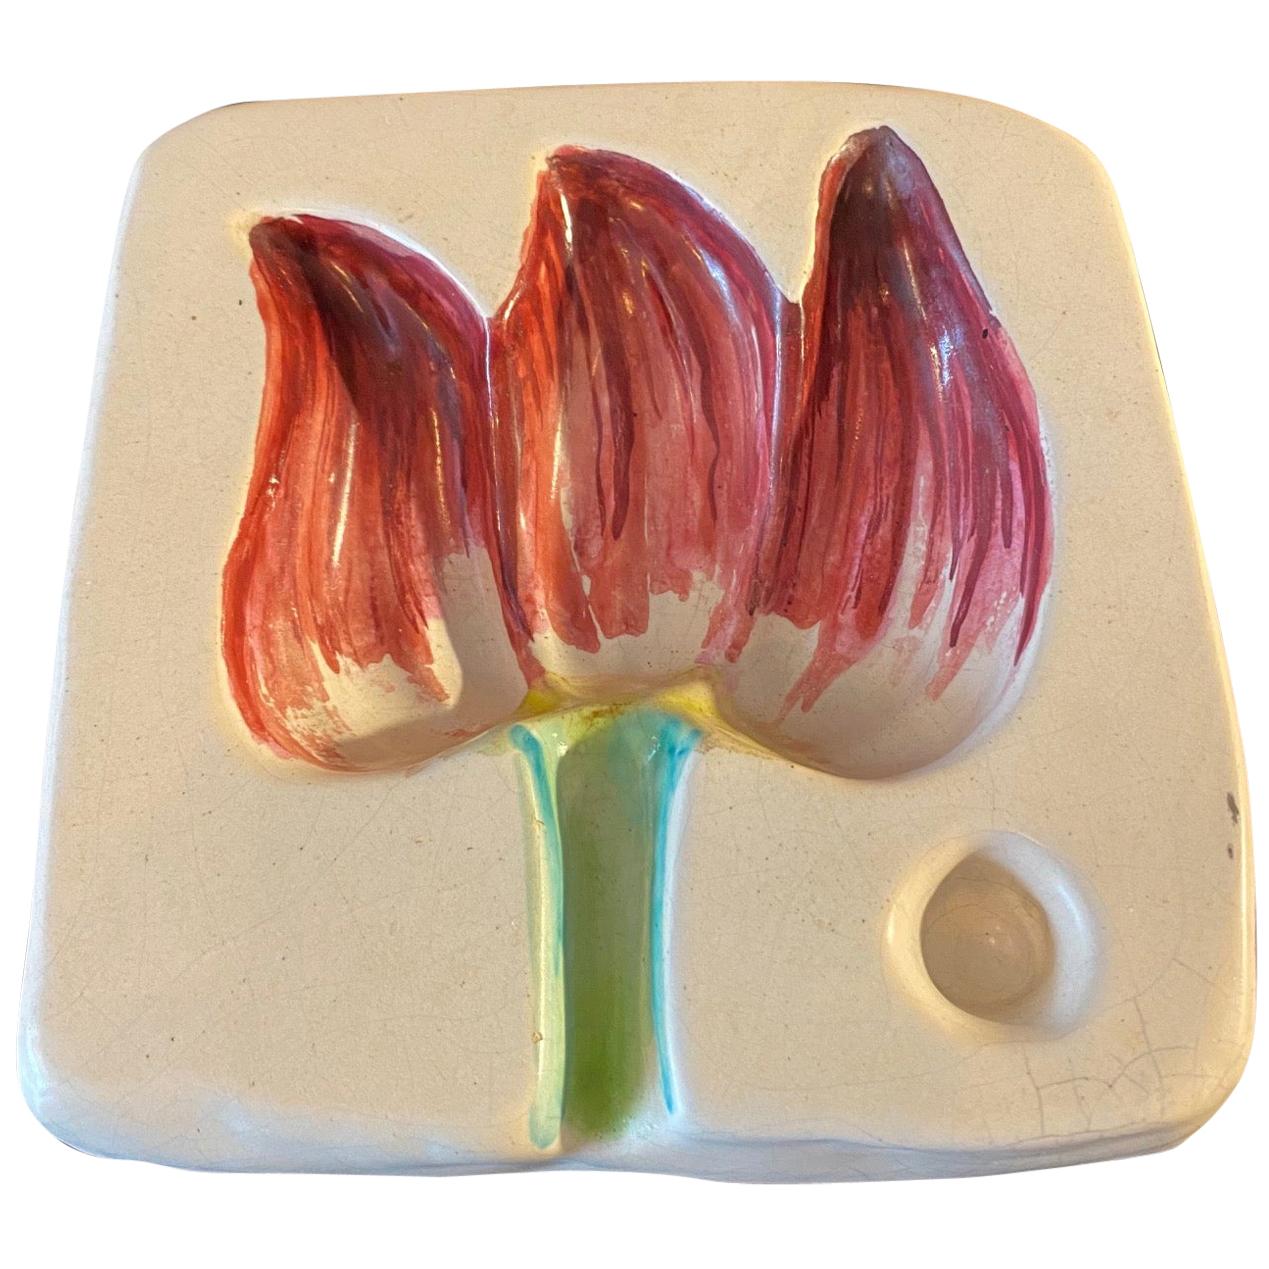 Ceramic Ashtray "Tulip" by Georges Jouve, France, 1950s